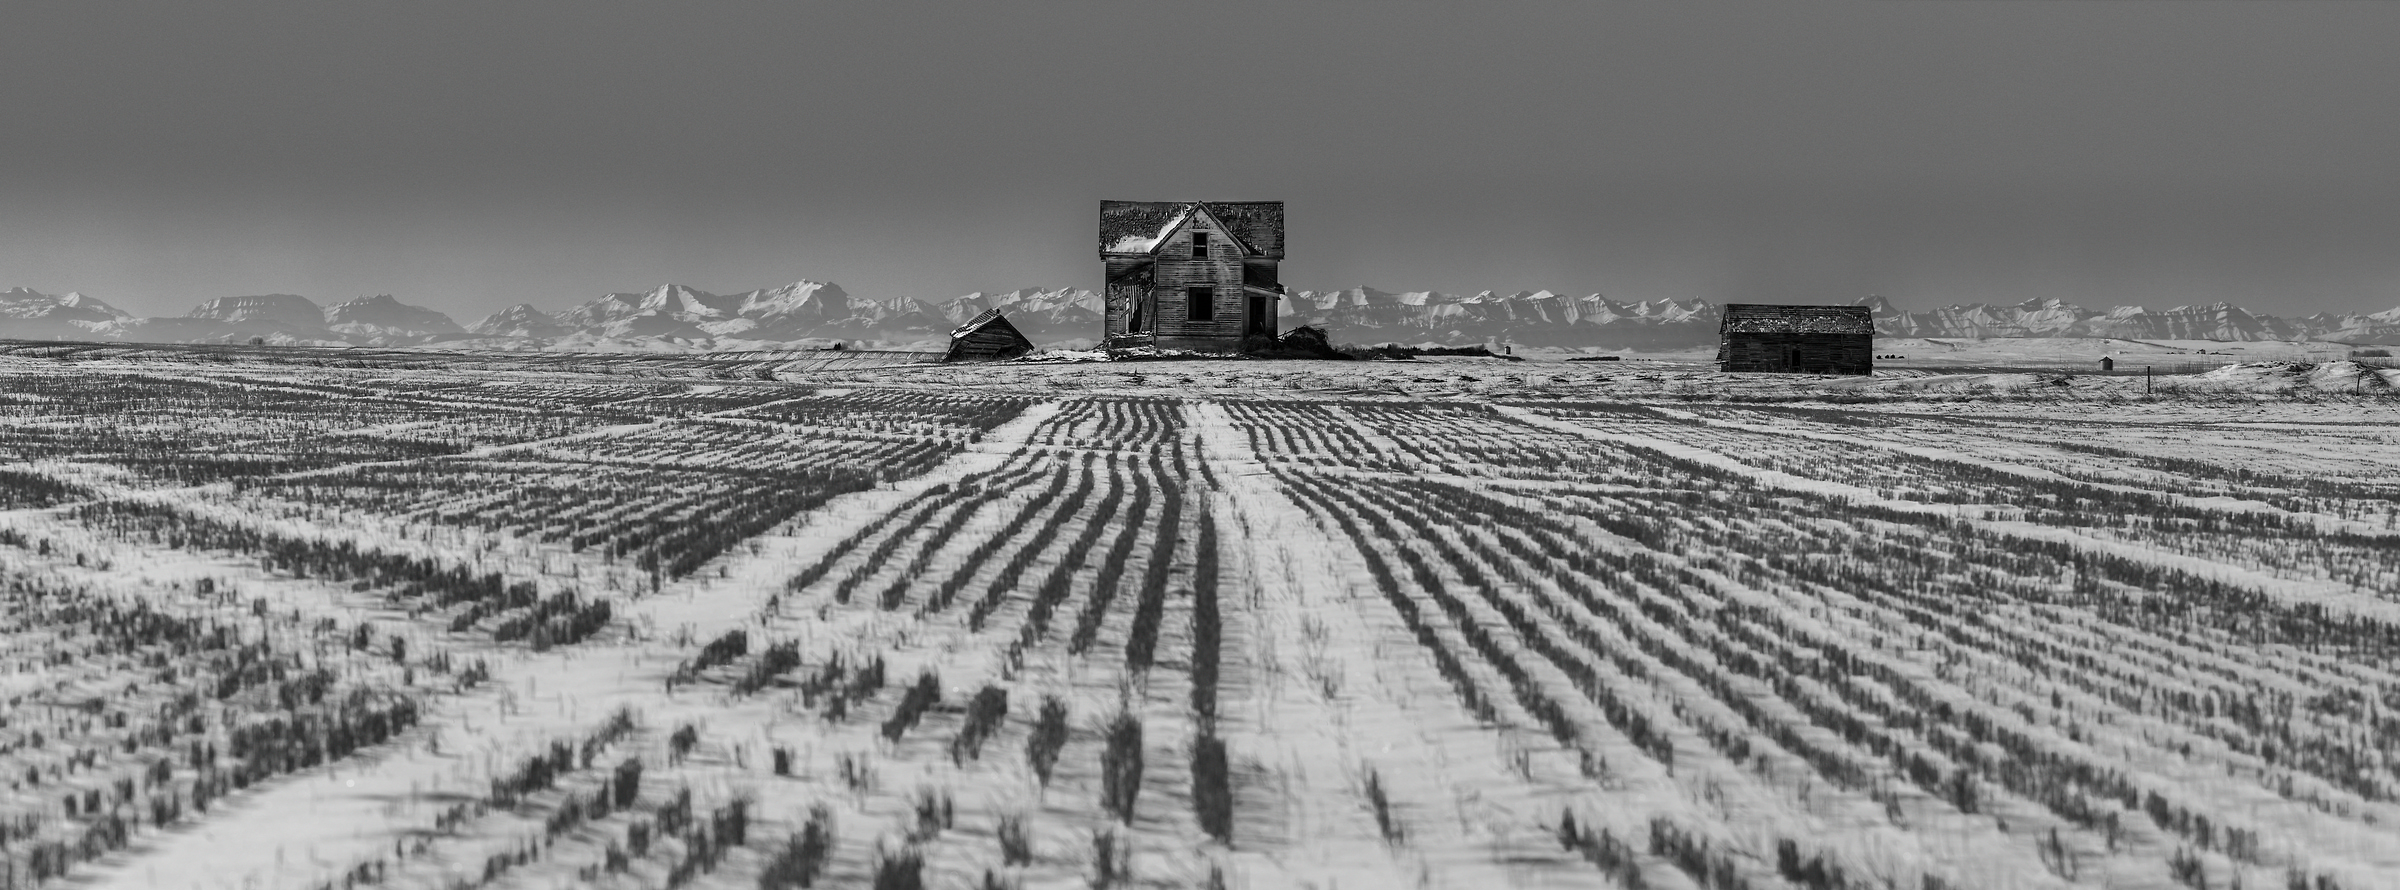 1,052 megapixels! A very high resolution, large-format VAST photo print of snow on a prairie with an abandoned house; black & white photograph created by Scott Dimond in Foothills County, Alberta, Canada